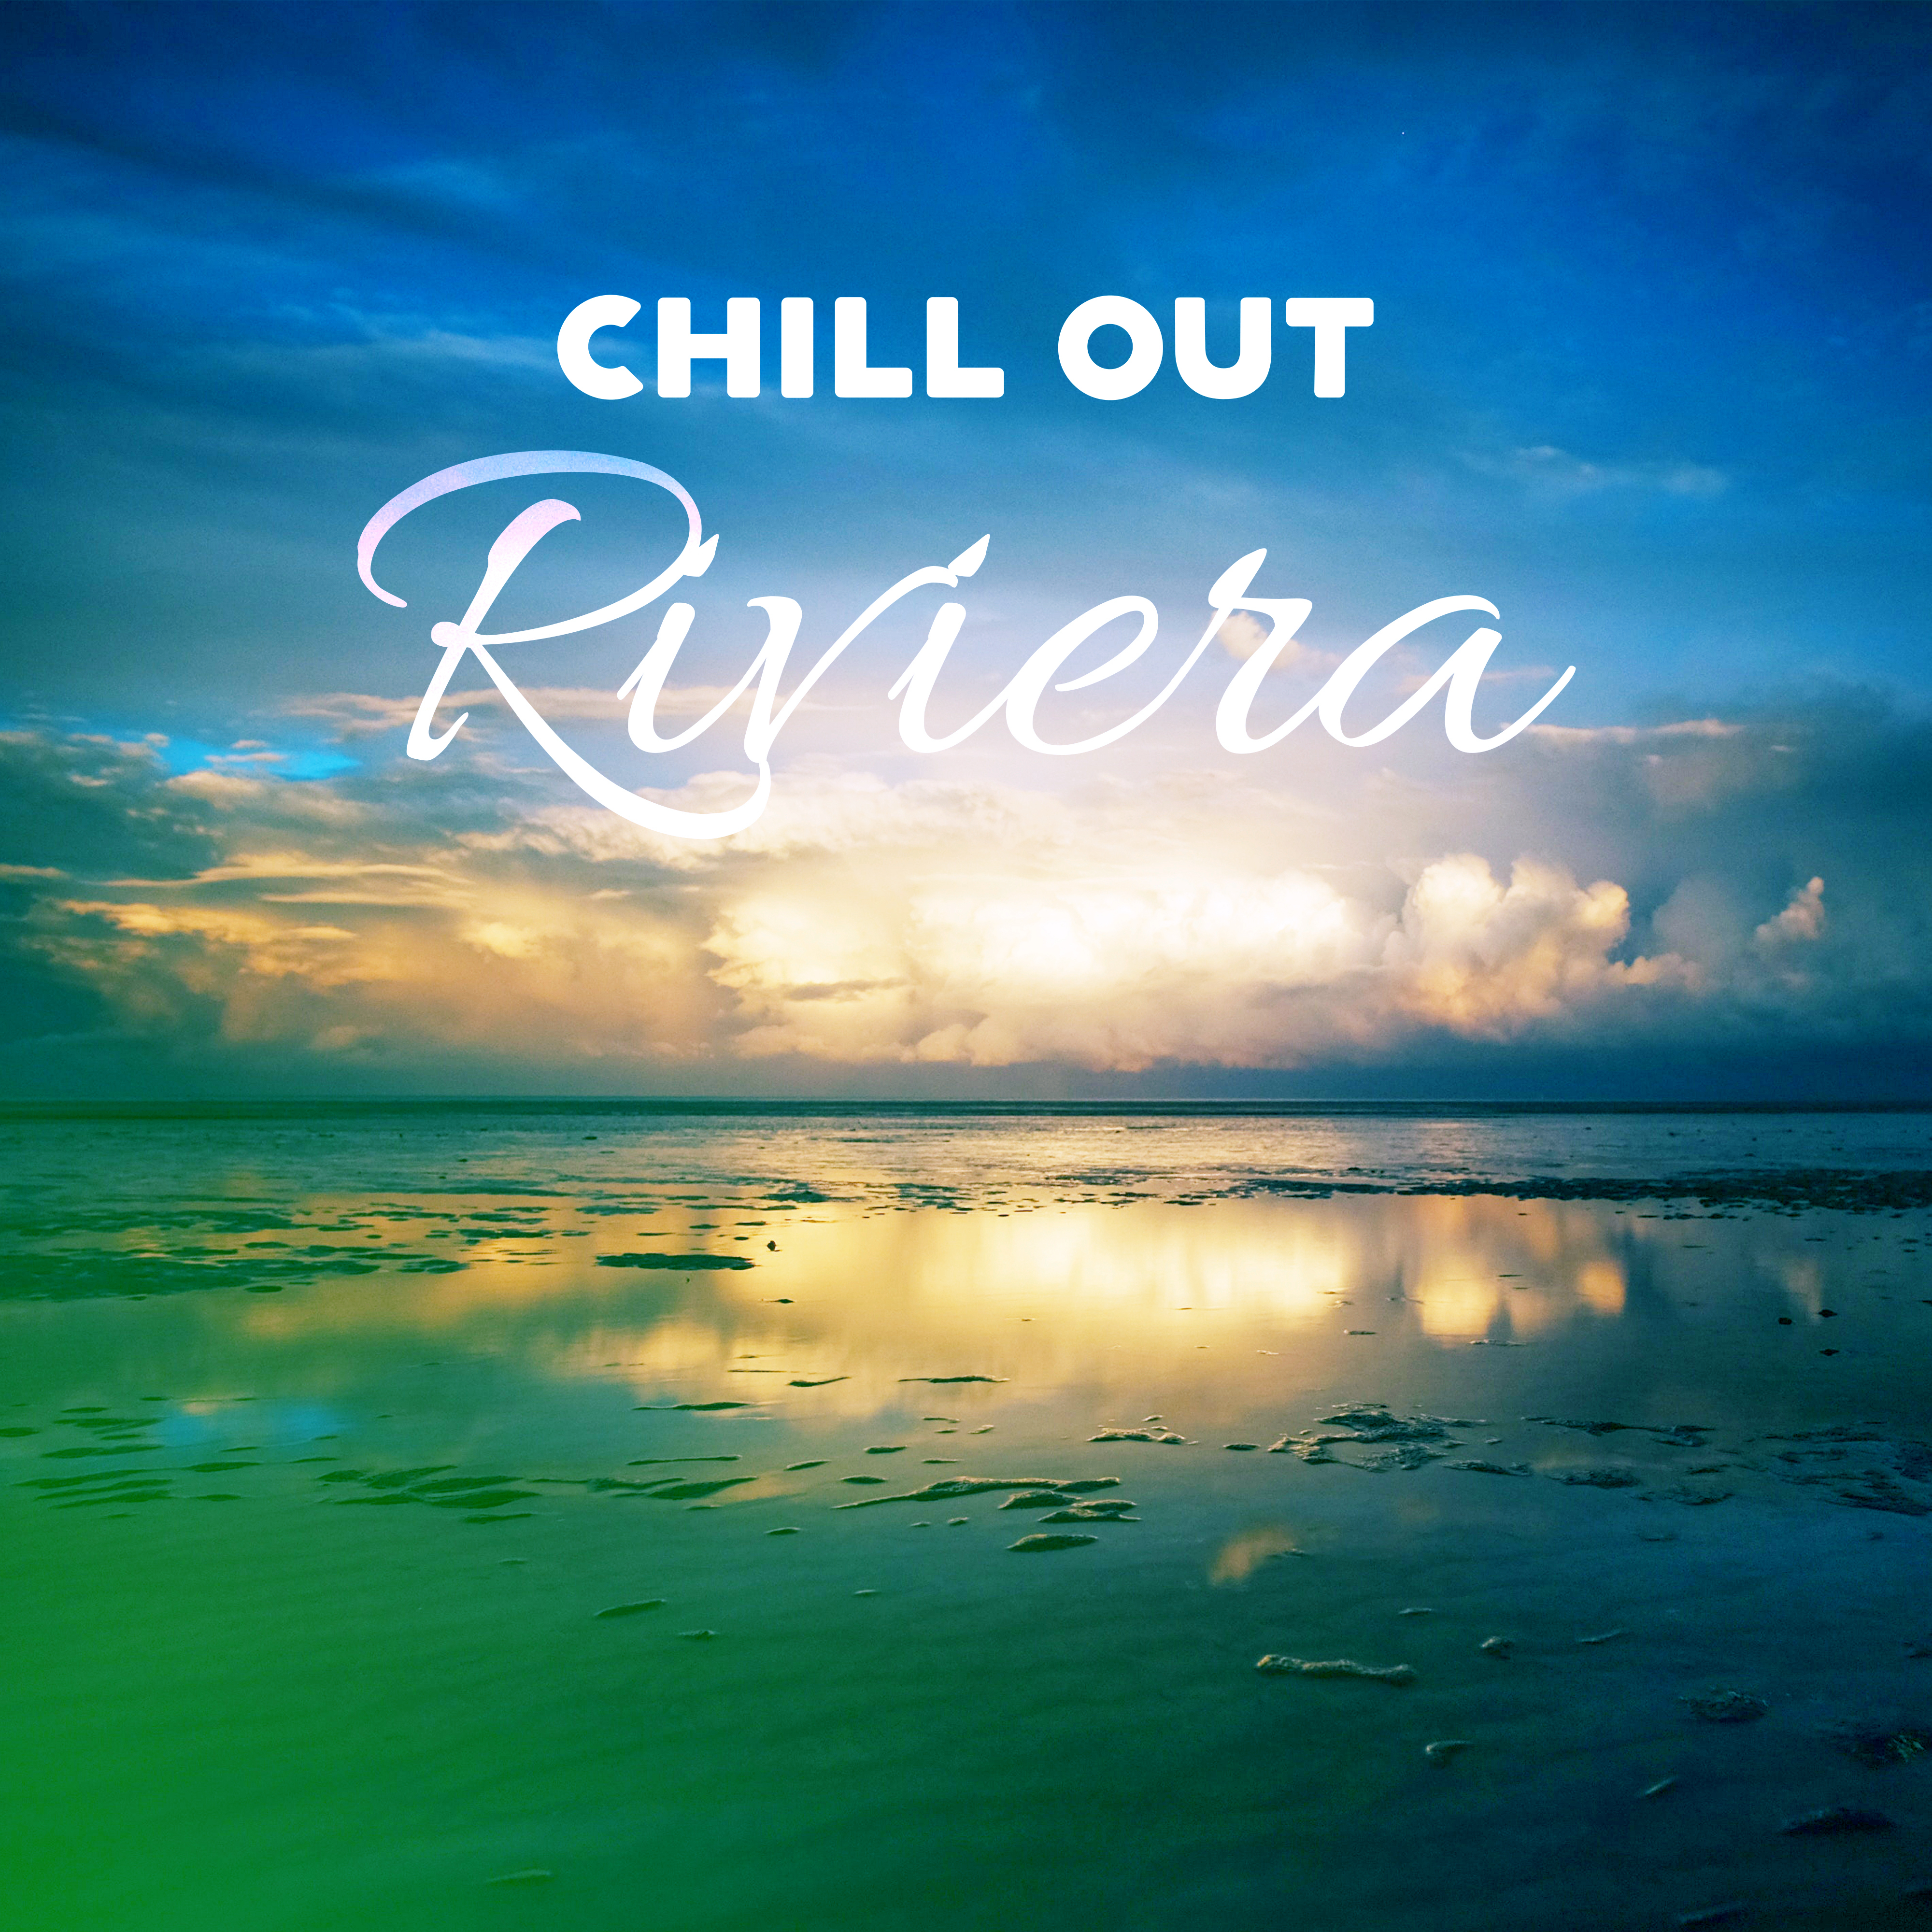 Chill Out Riviera  - New Chill Out Beats, Relax & Chill, Positive Vibes, Baleares Islands, Ibiza